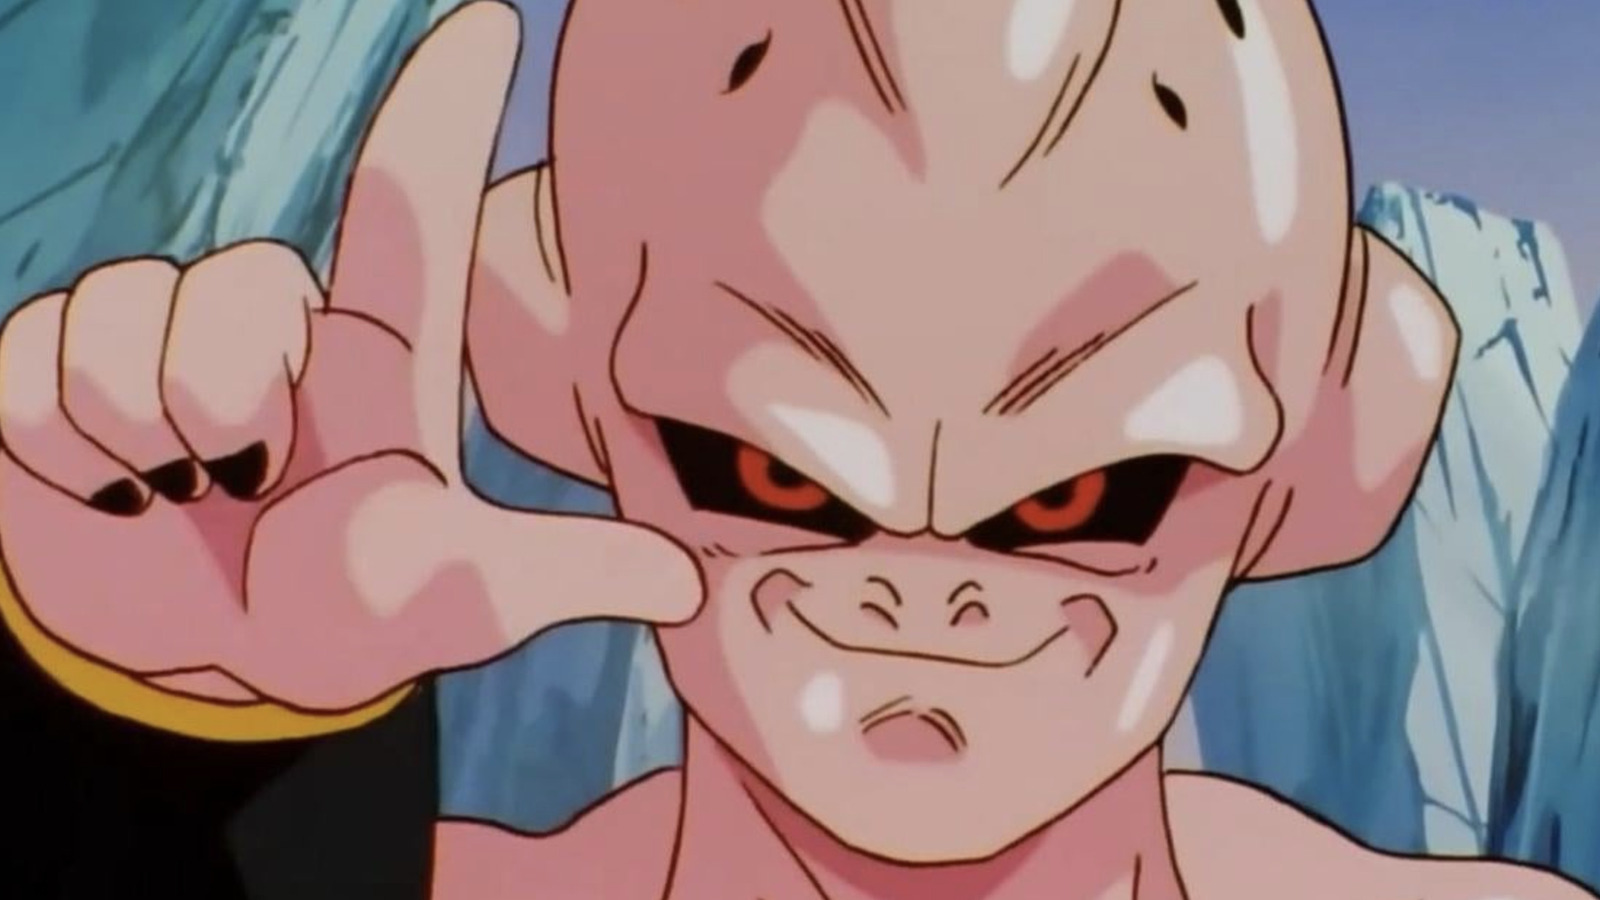 What are the different forms of Majin Buu in Dragon Ball Z? How do